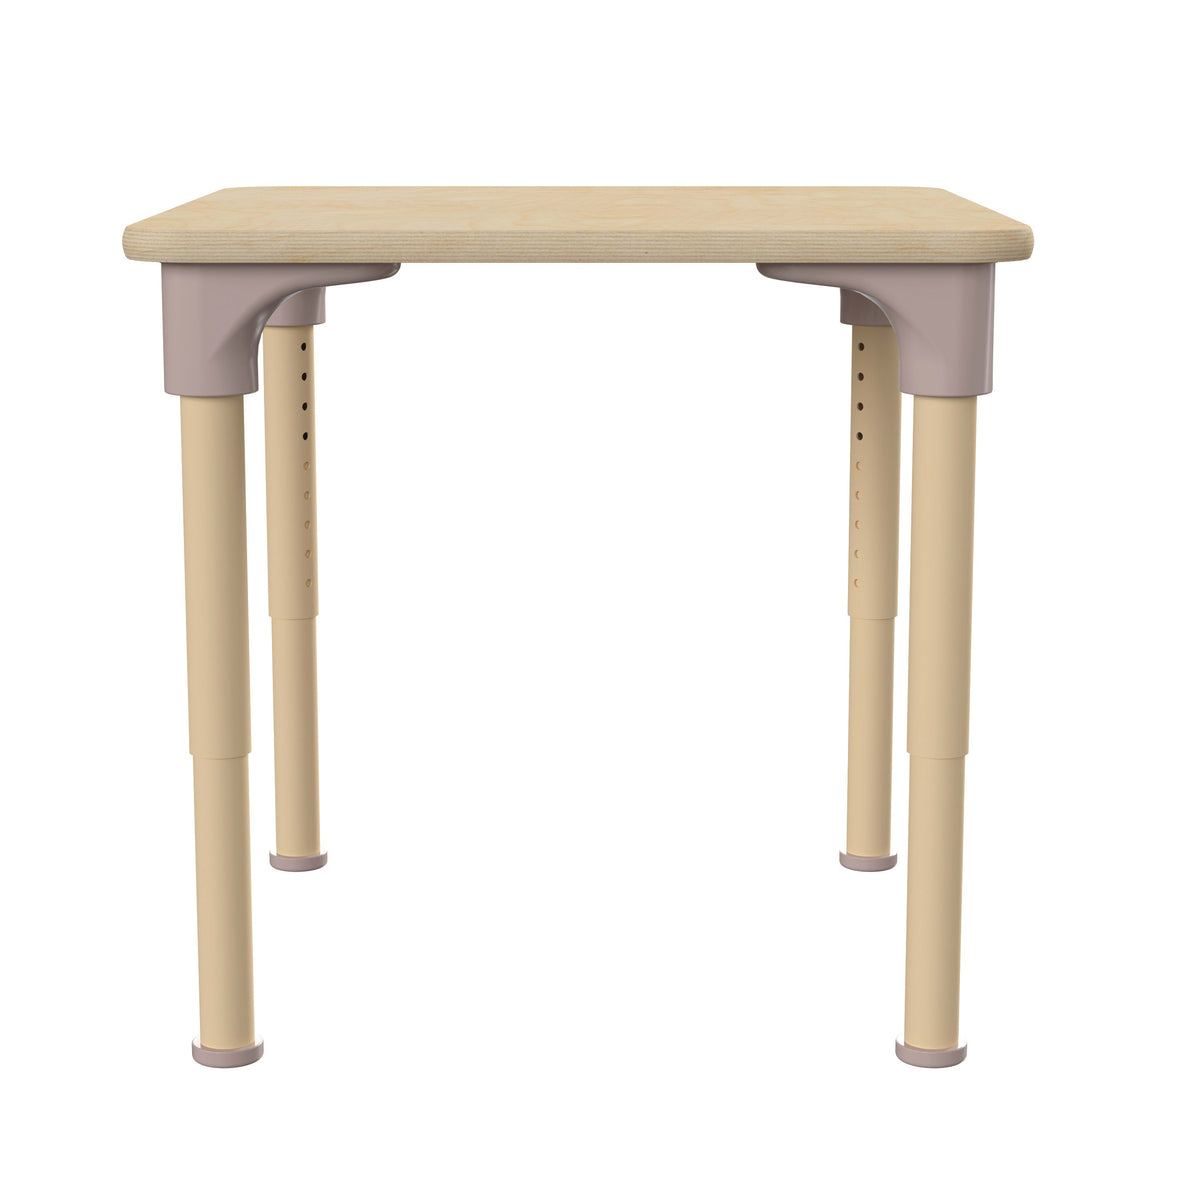 Commercial Grade Adjustable Height Square Wooden Classroom Table - Beech